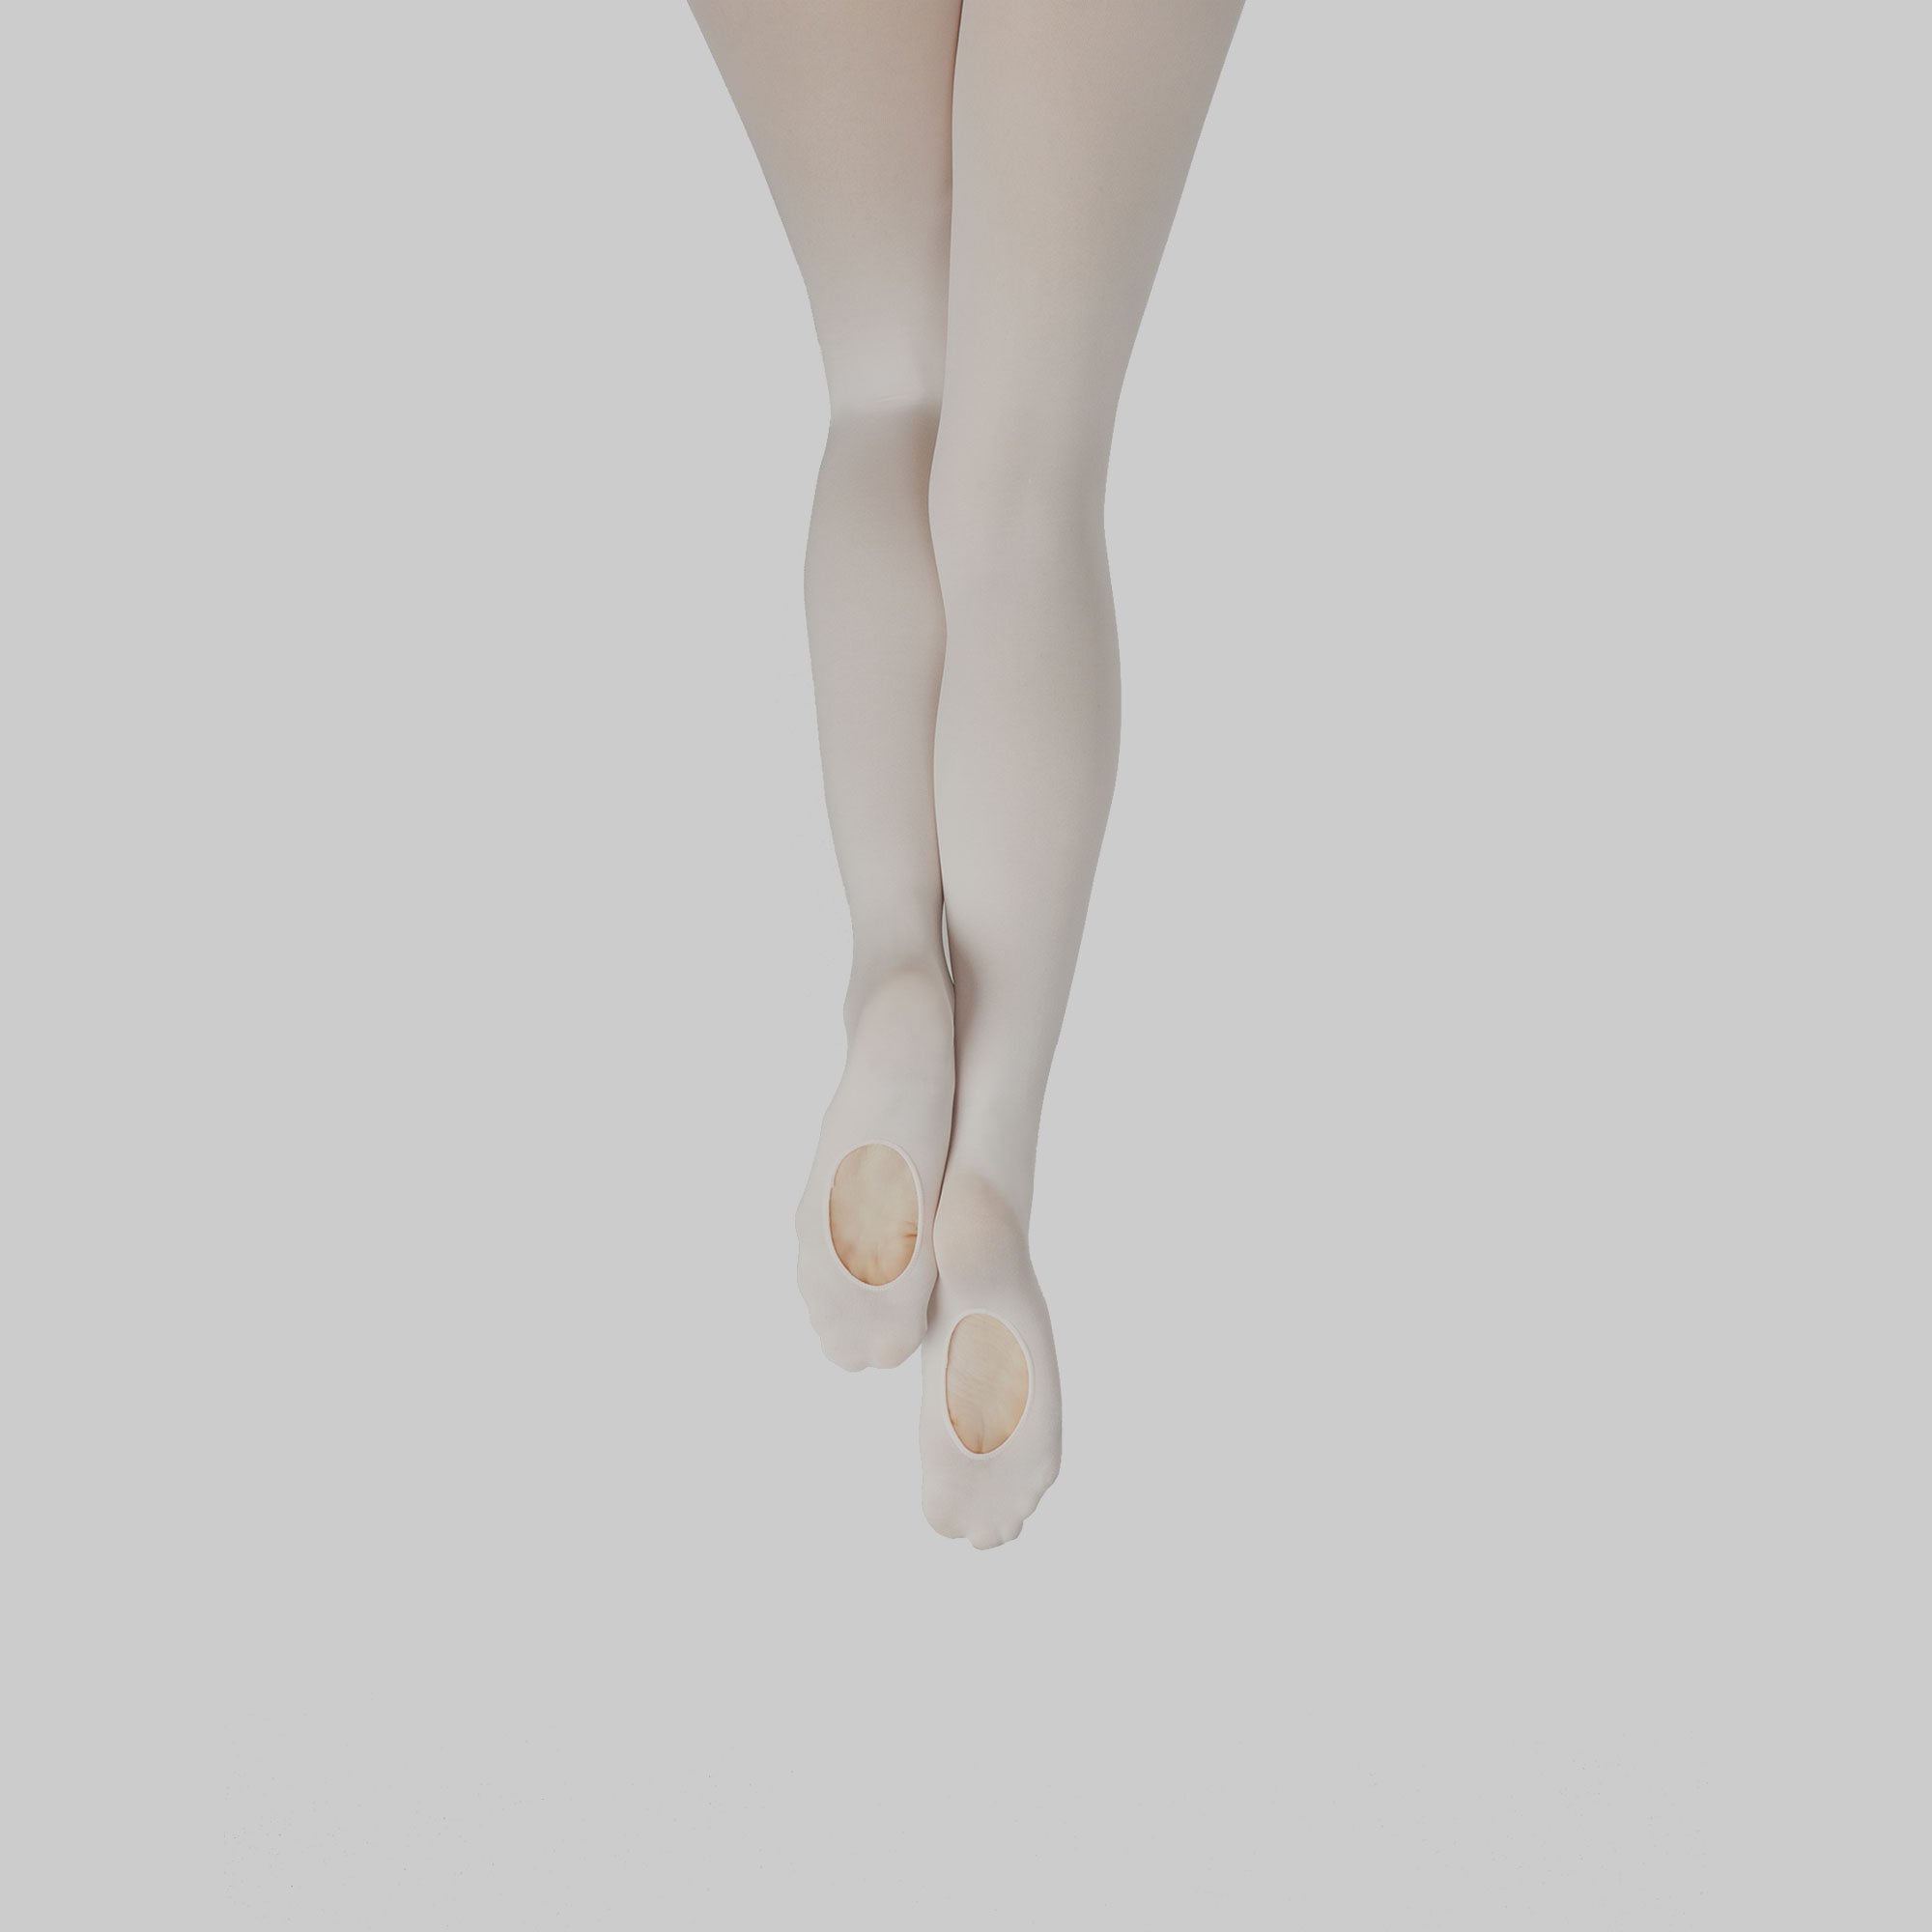 Dance Tights TAN / SKIN TONE CONVERTIBLE For Jazz & Tap Tod to XL